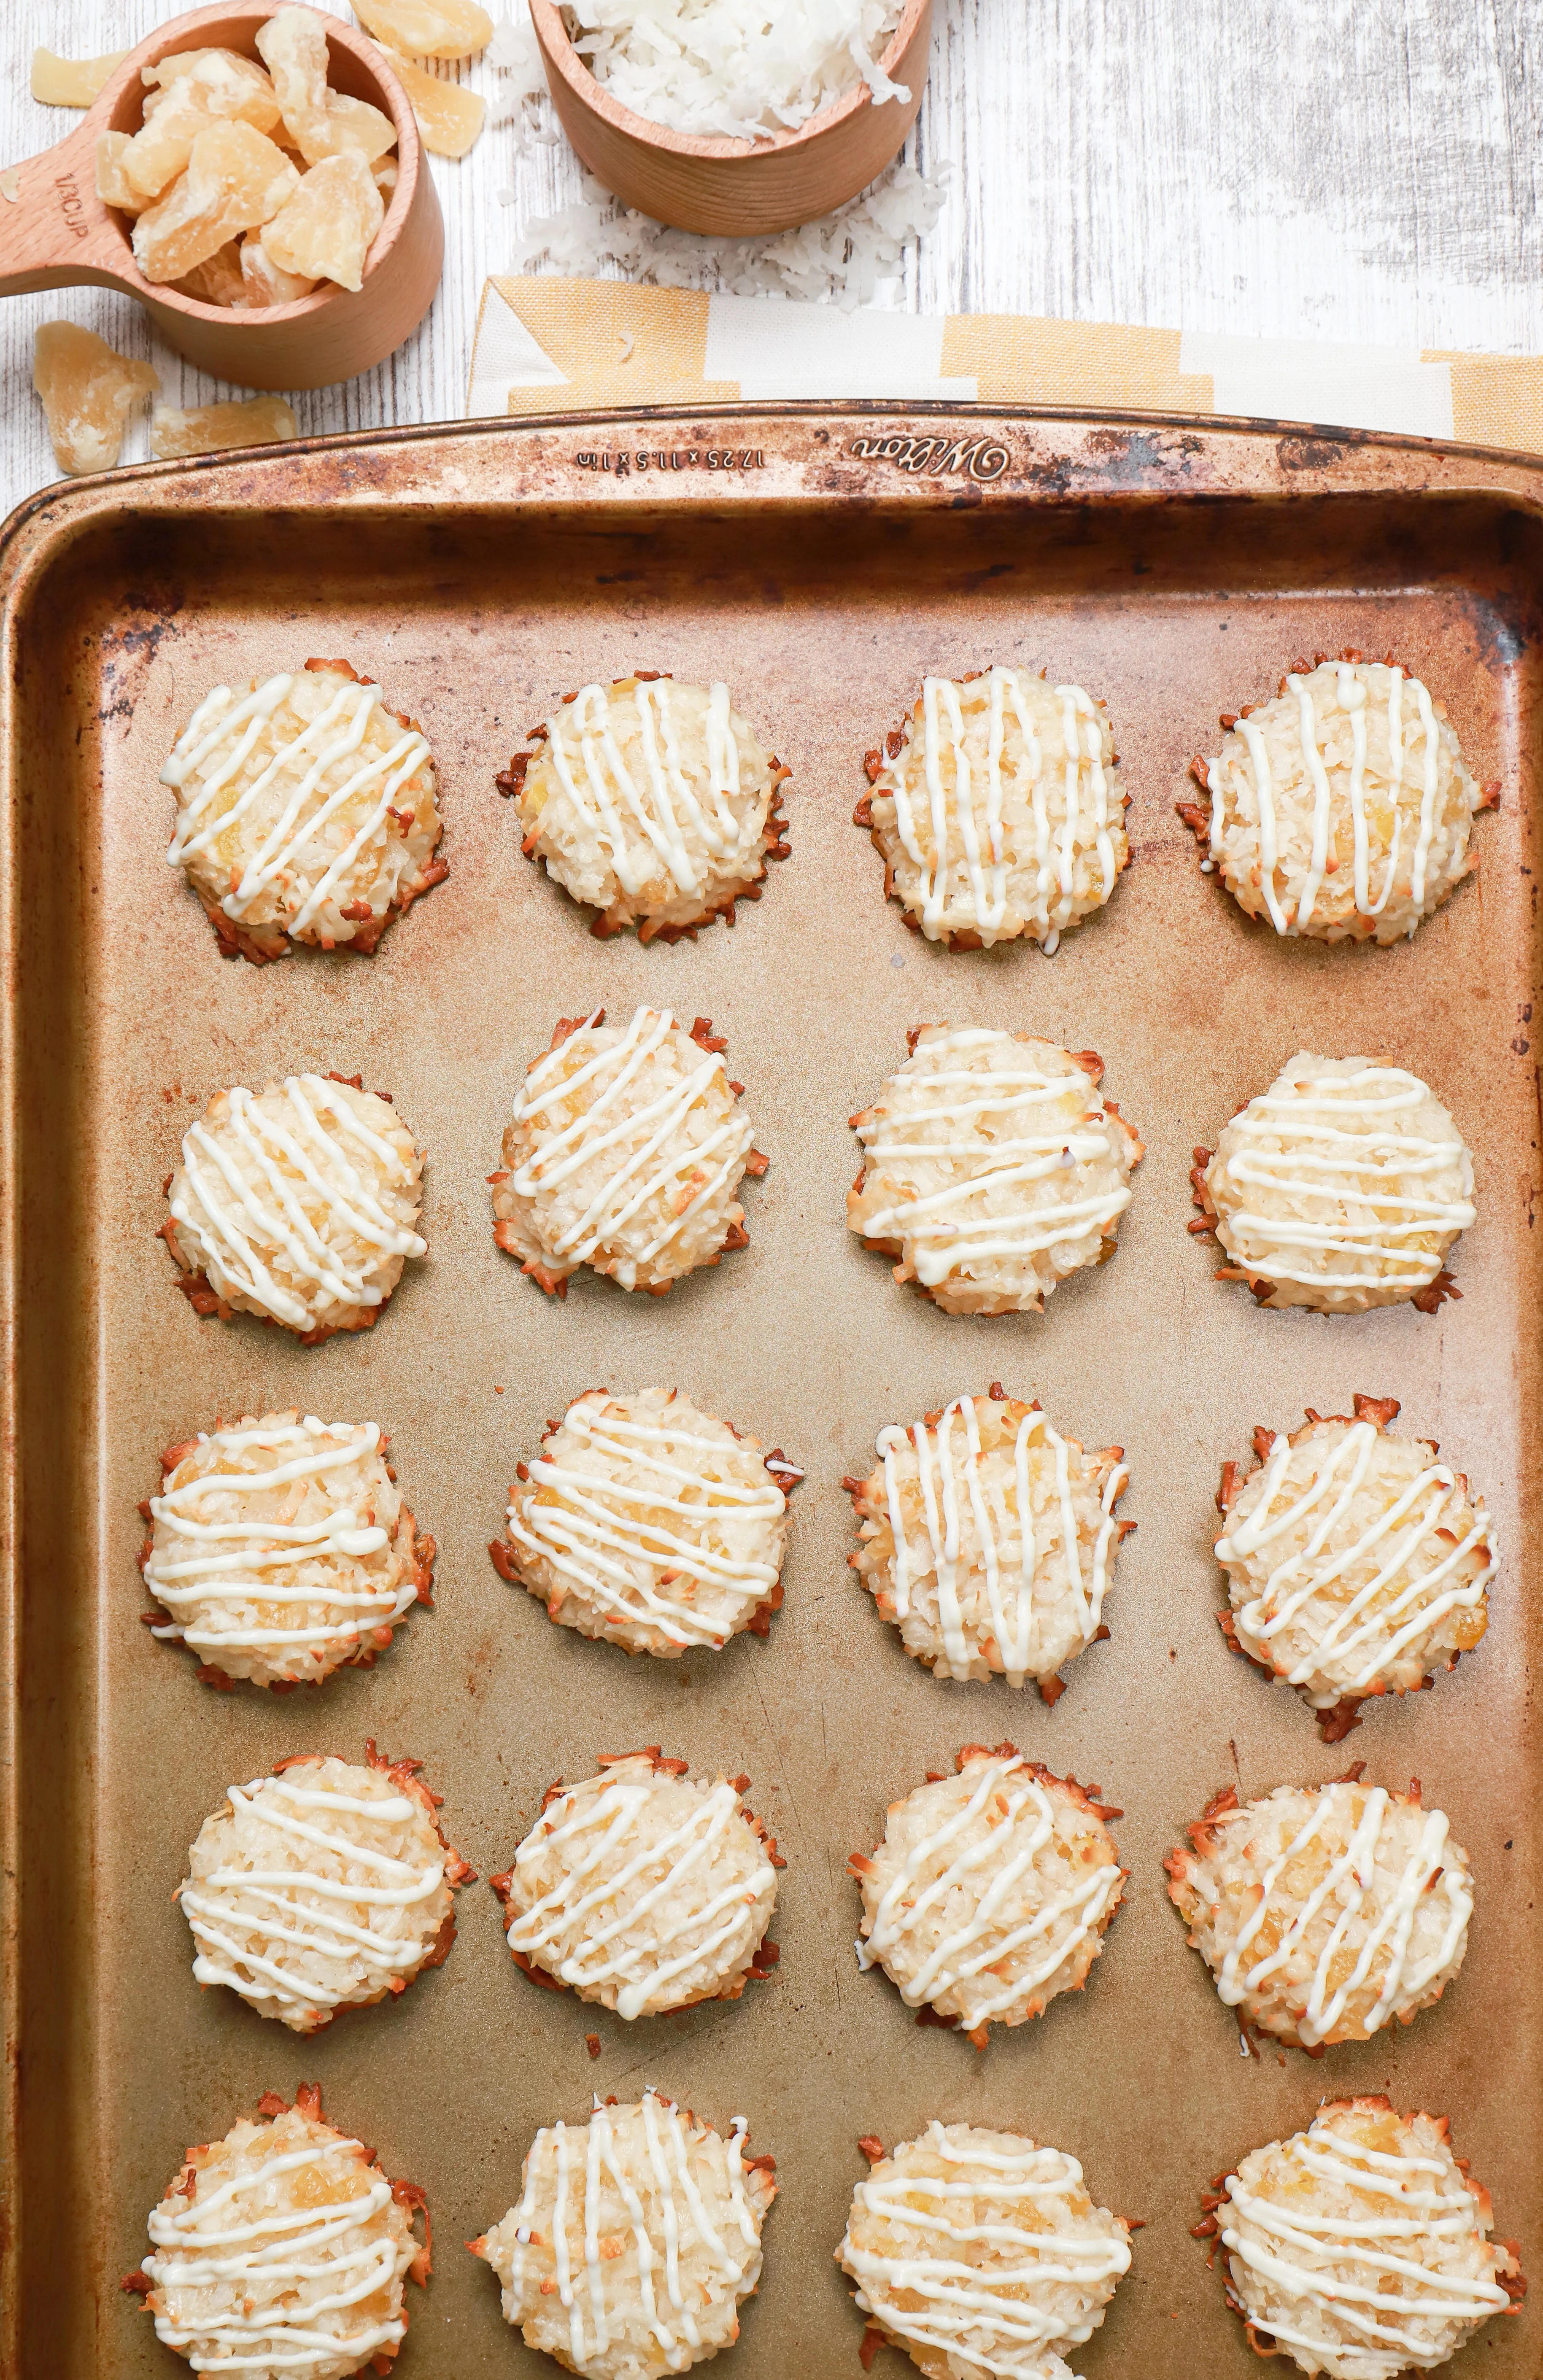 Overhead view of white chocolate drizzled pineapple coconut macaroons on a parchment paper lined baking sheet.